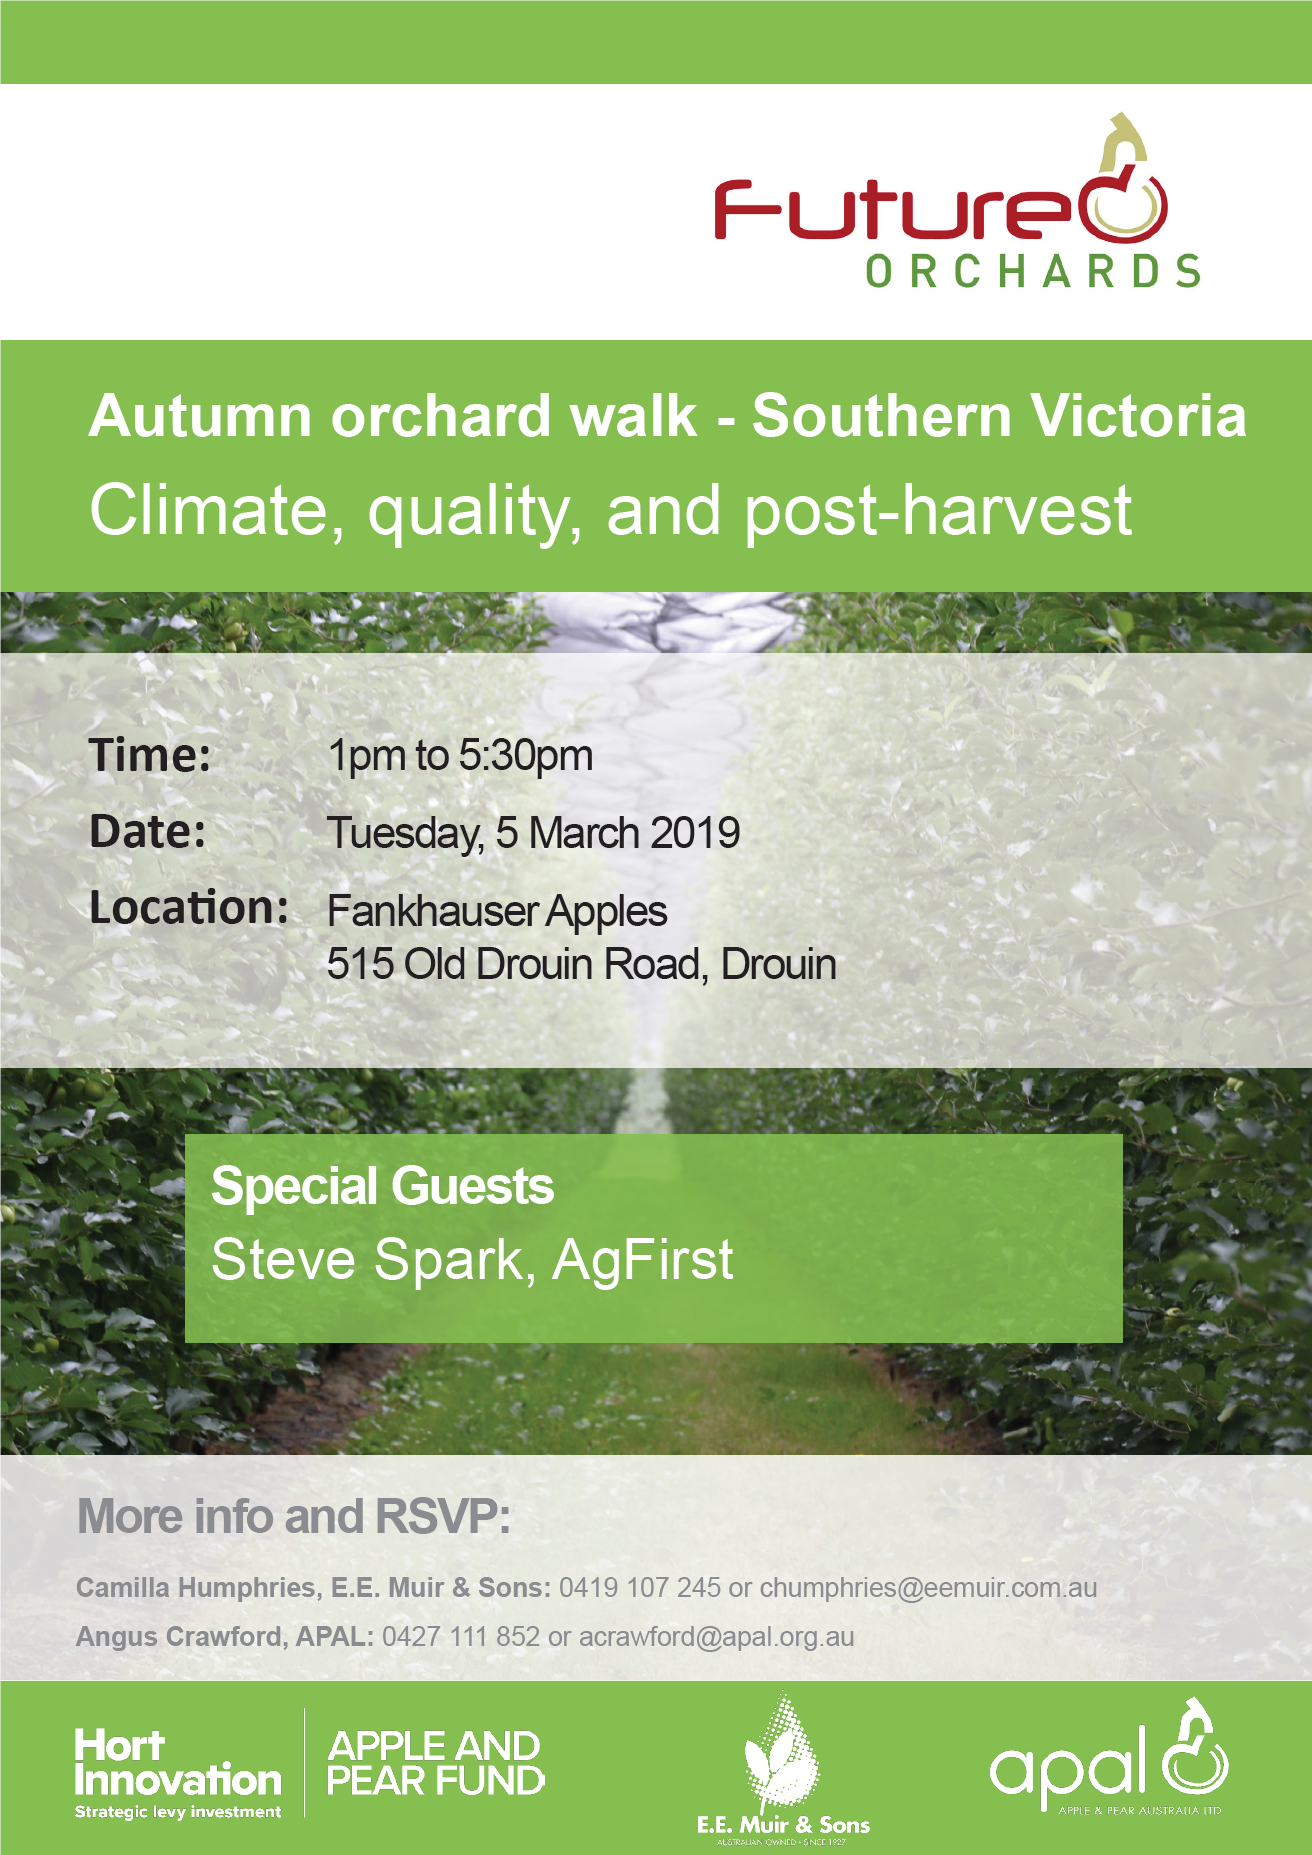 Future Orchards 'Autumn Orchard Walk' Southern Victoria- 5th March 2019